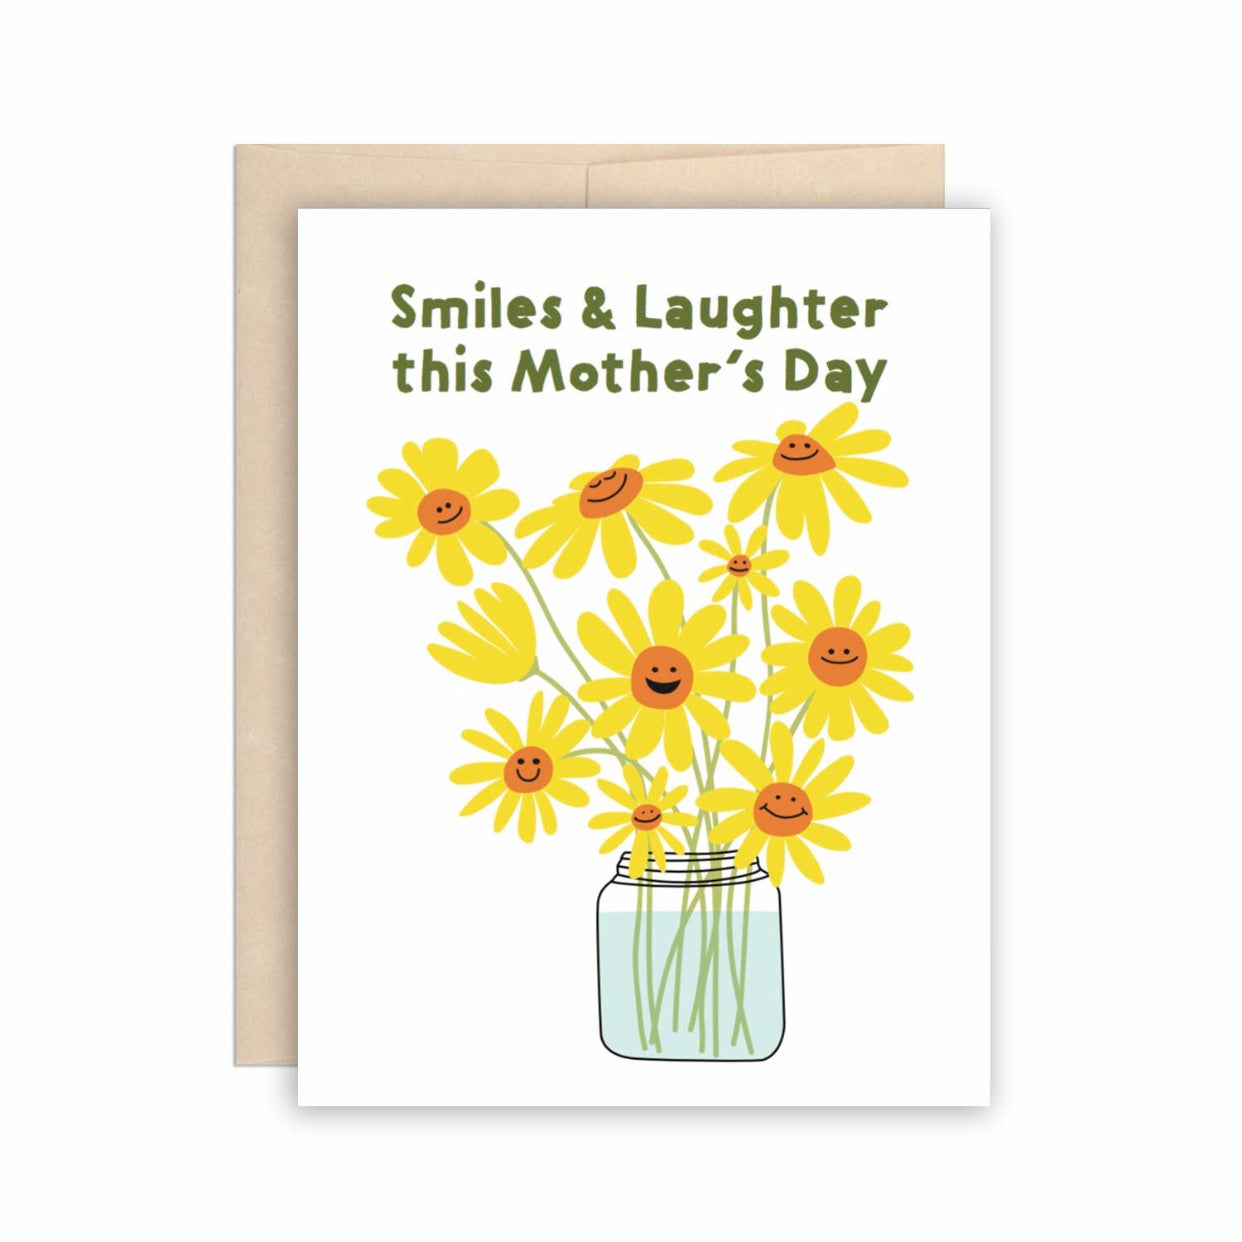 Smiles & Laughter mothers day card